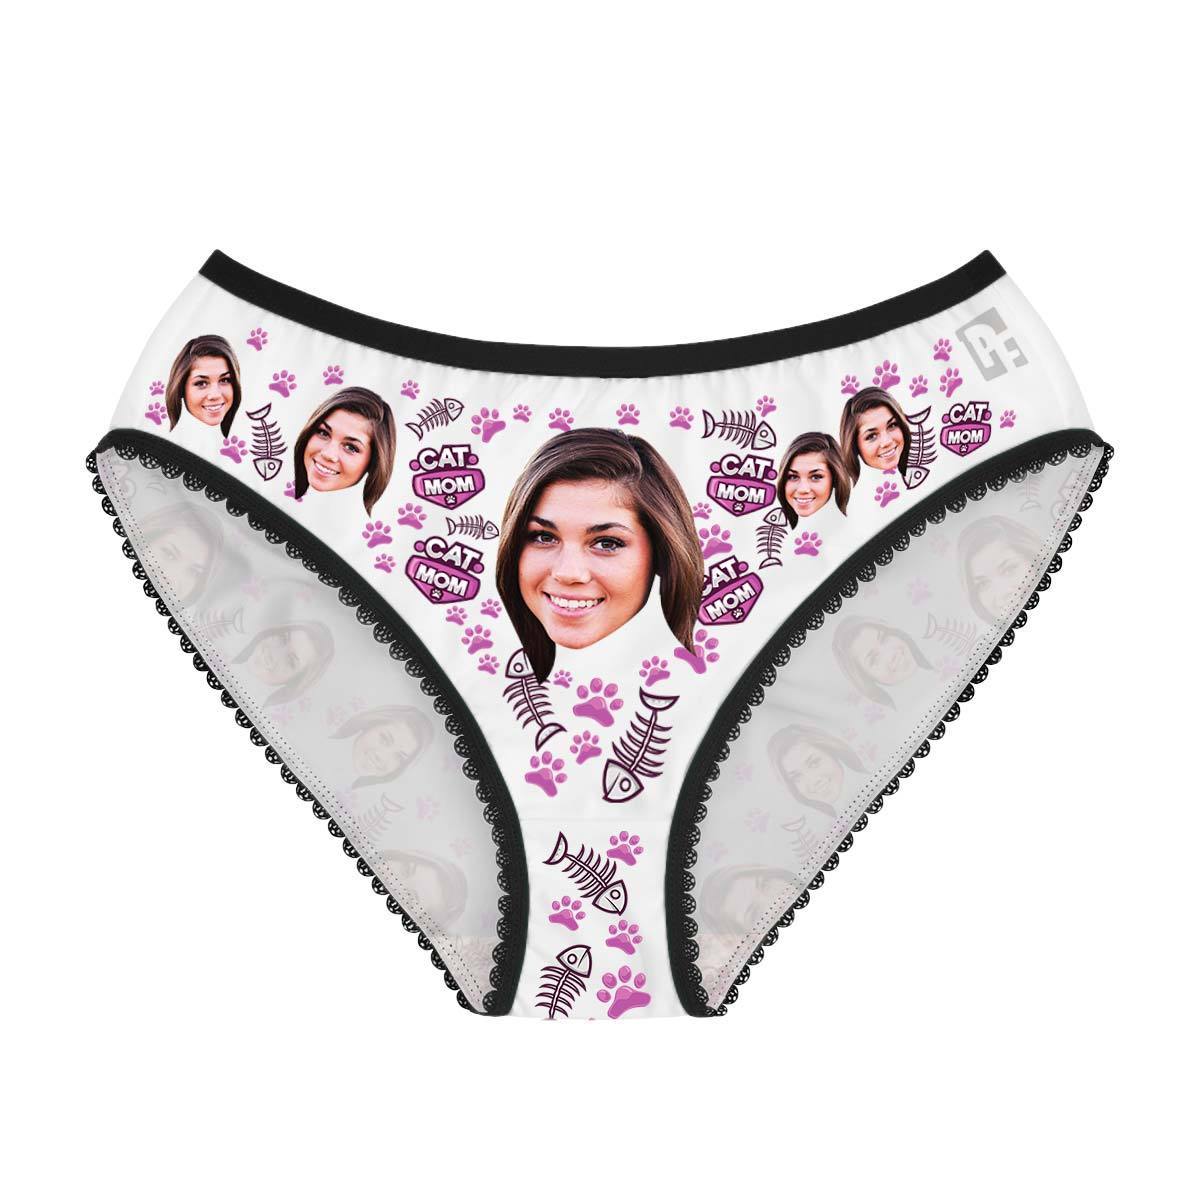 White Cat Mom women's underwear briefs personalized with photo printed on them